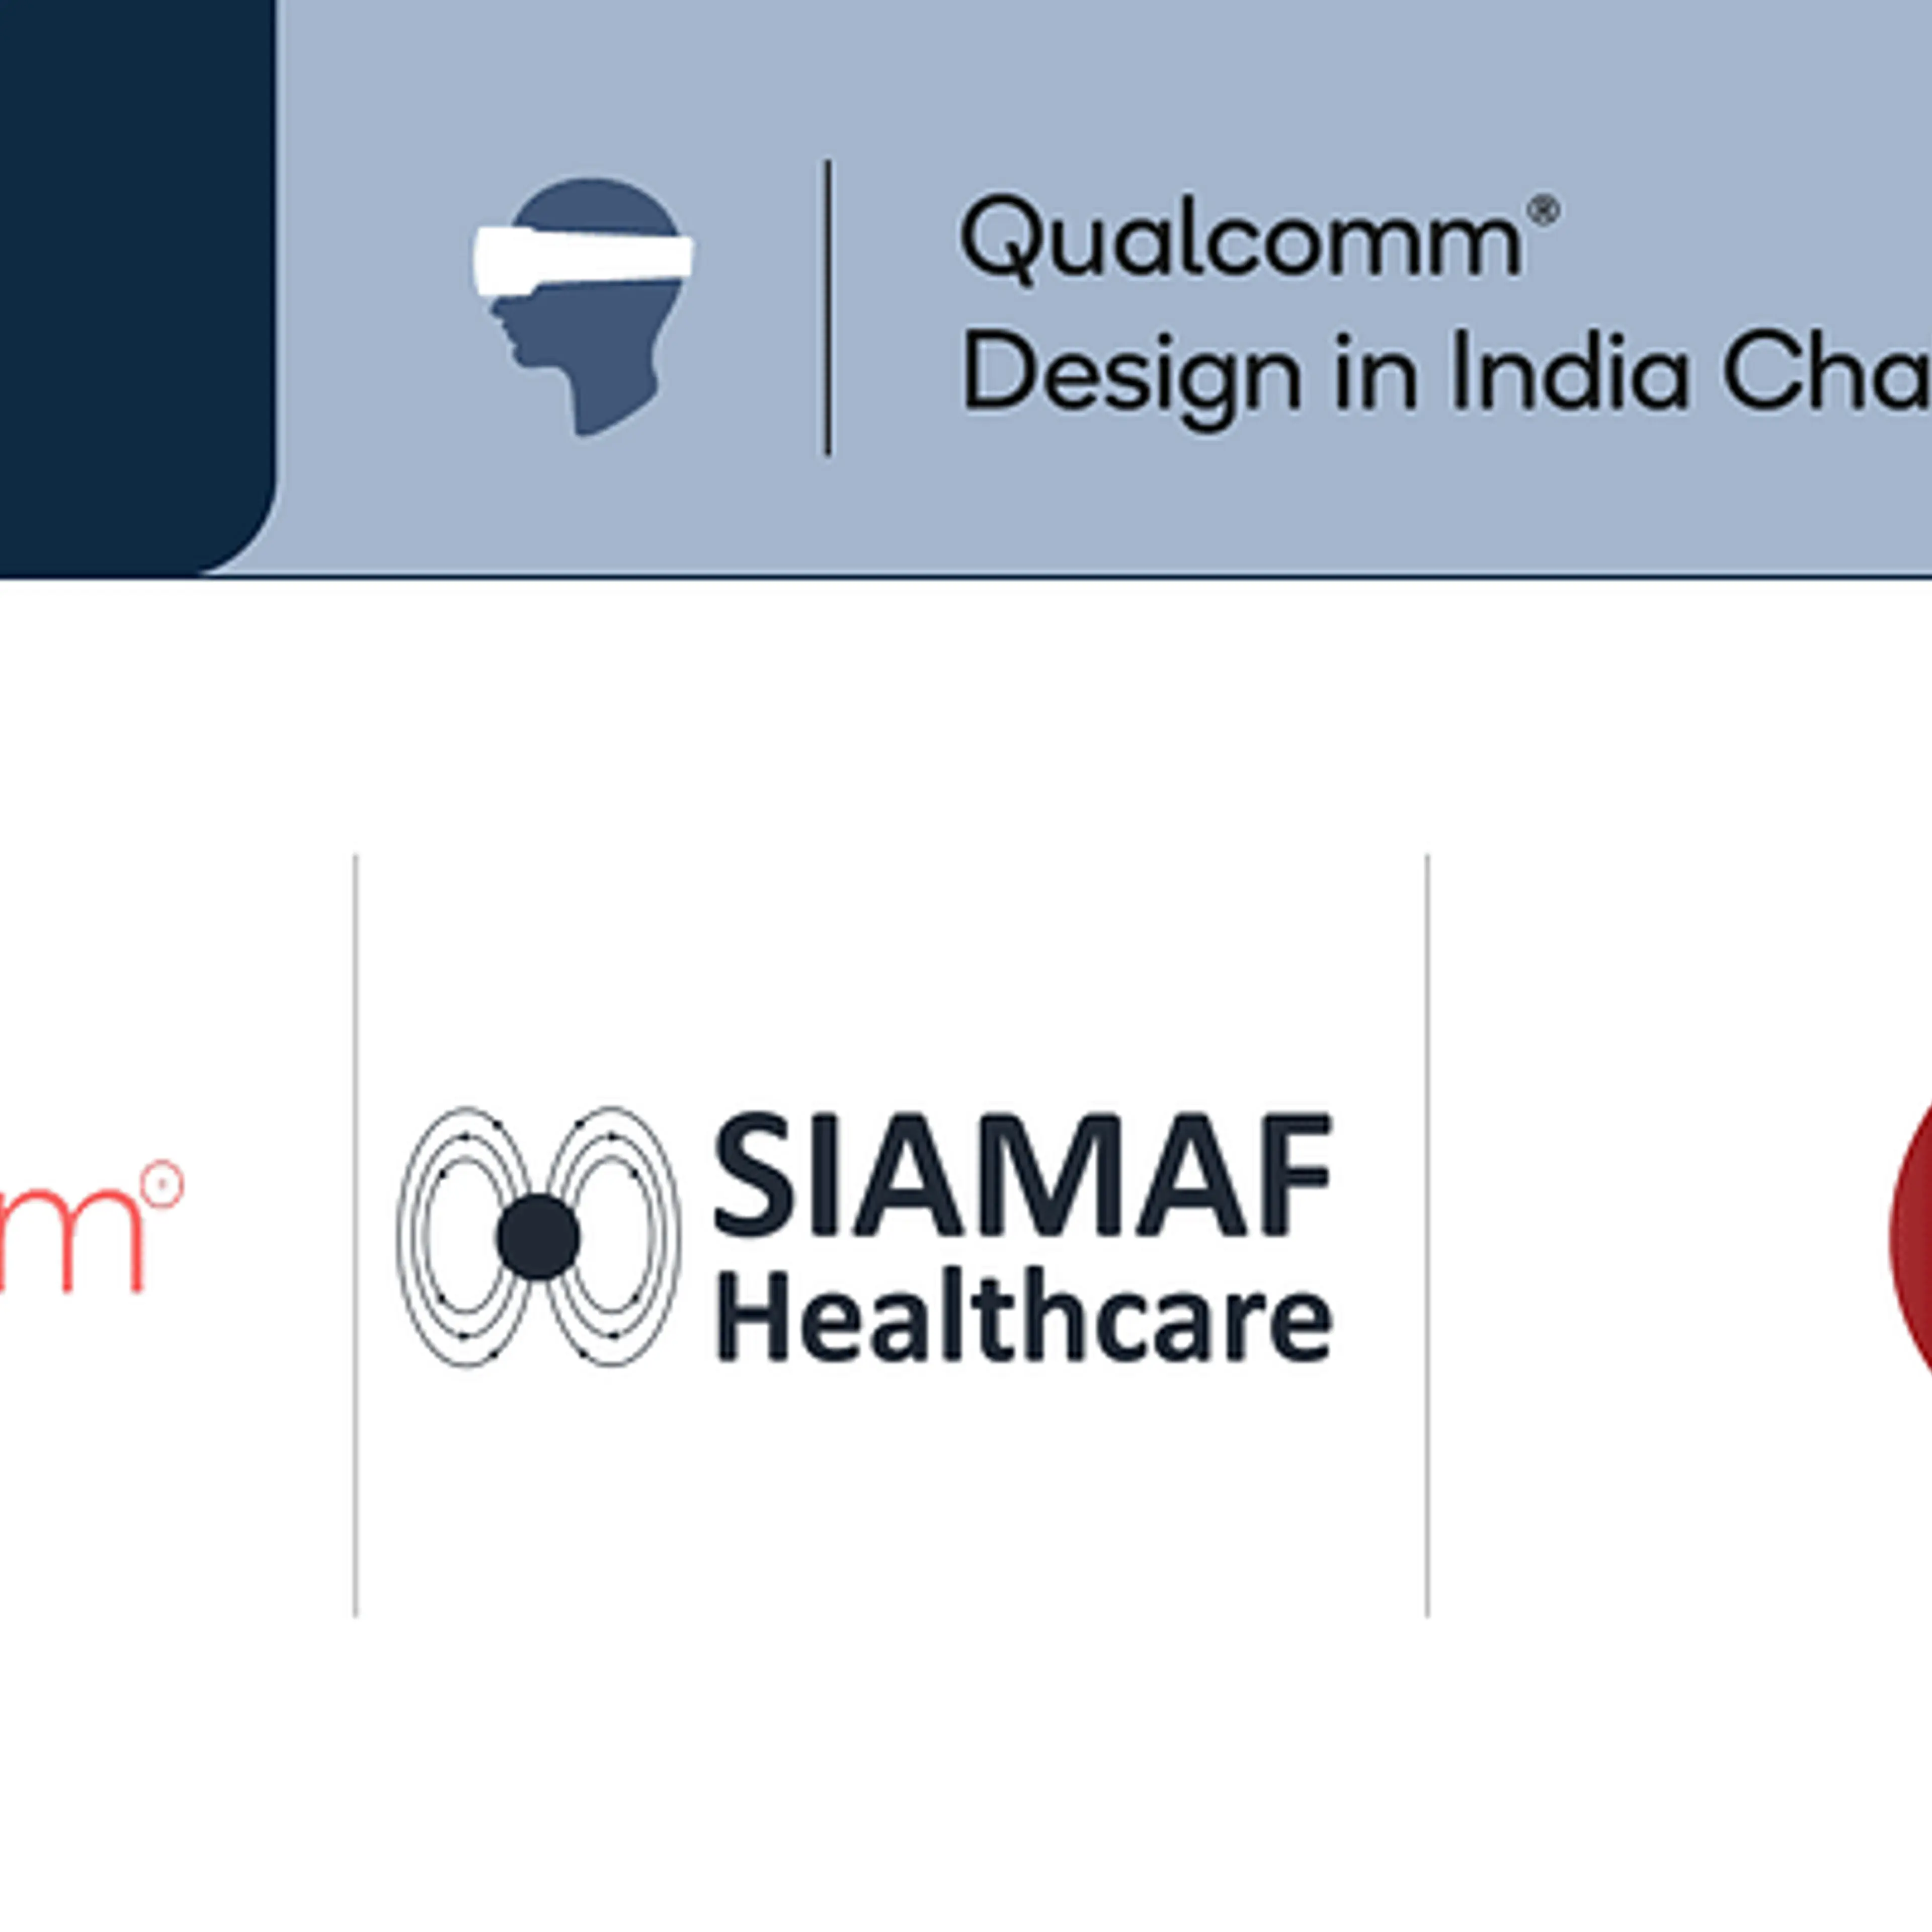 Qualcomm Design In India Challenge 2023 unveils innovators transforming maternal health, cancer treatment, and workplace safety